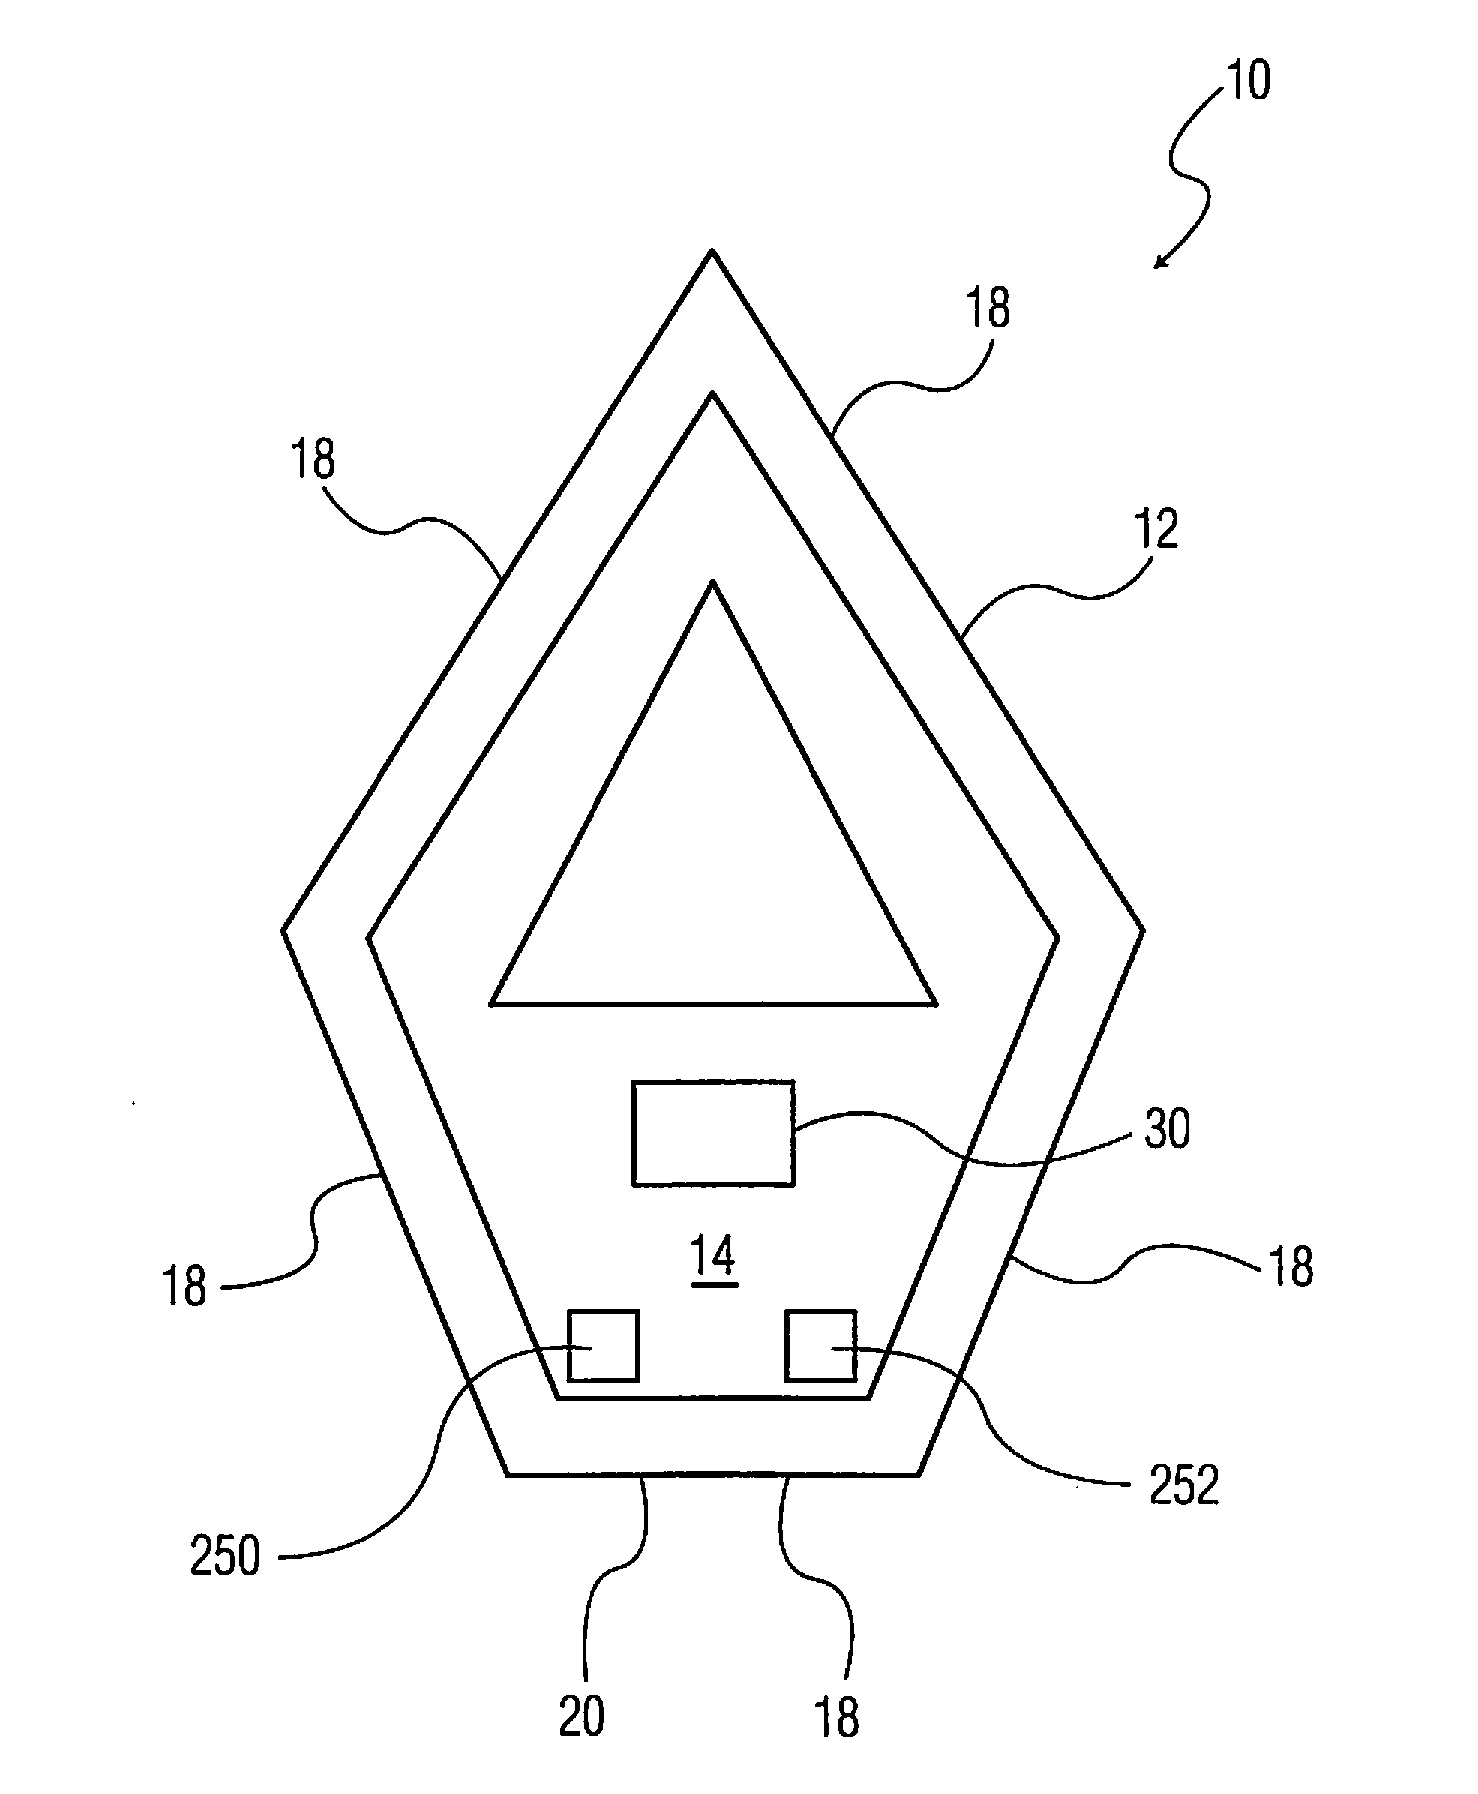 Signaling Device for an Obscured Environment